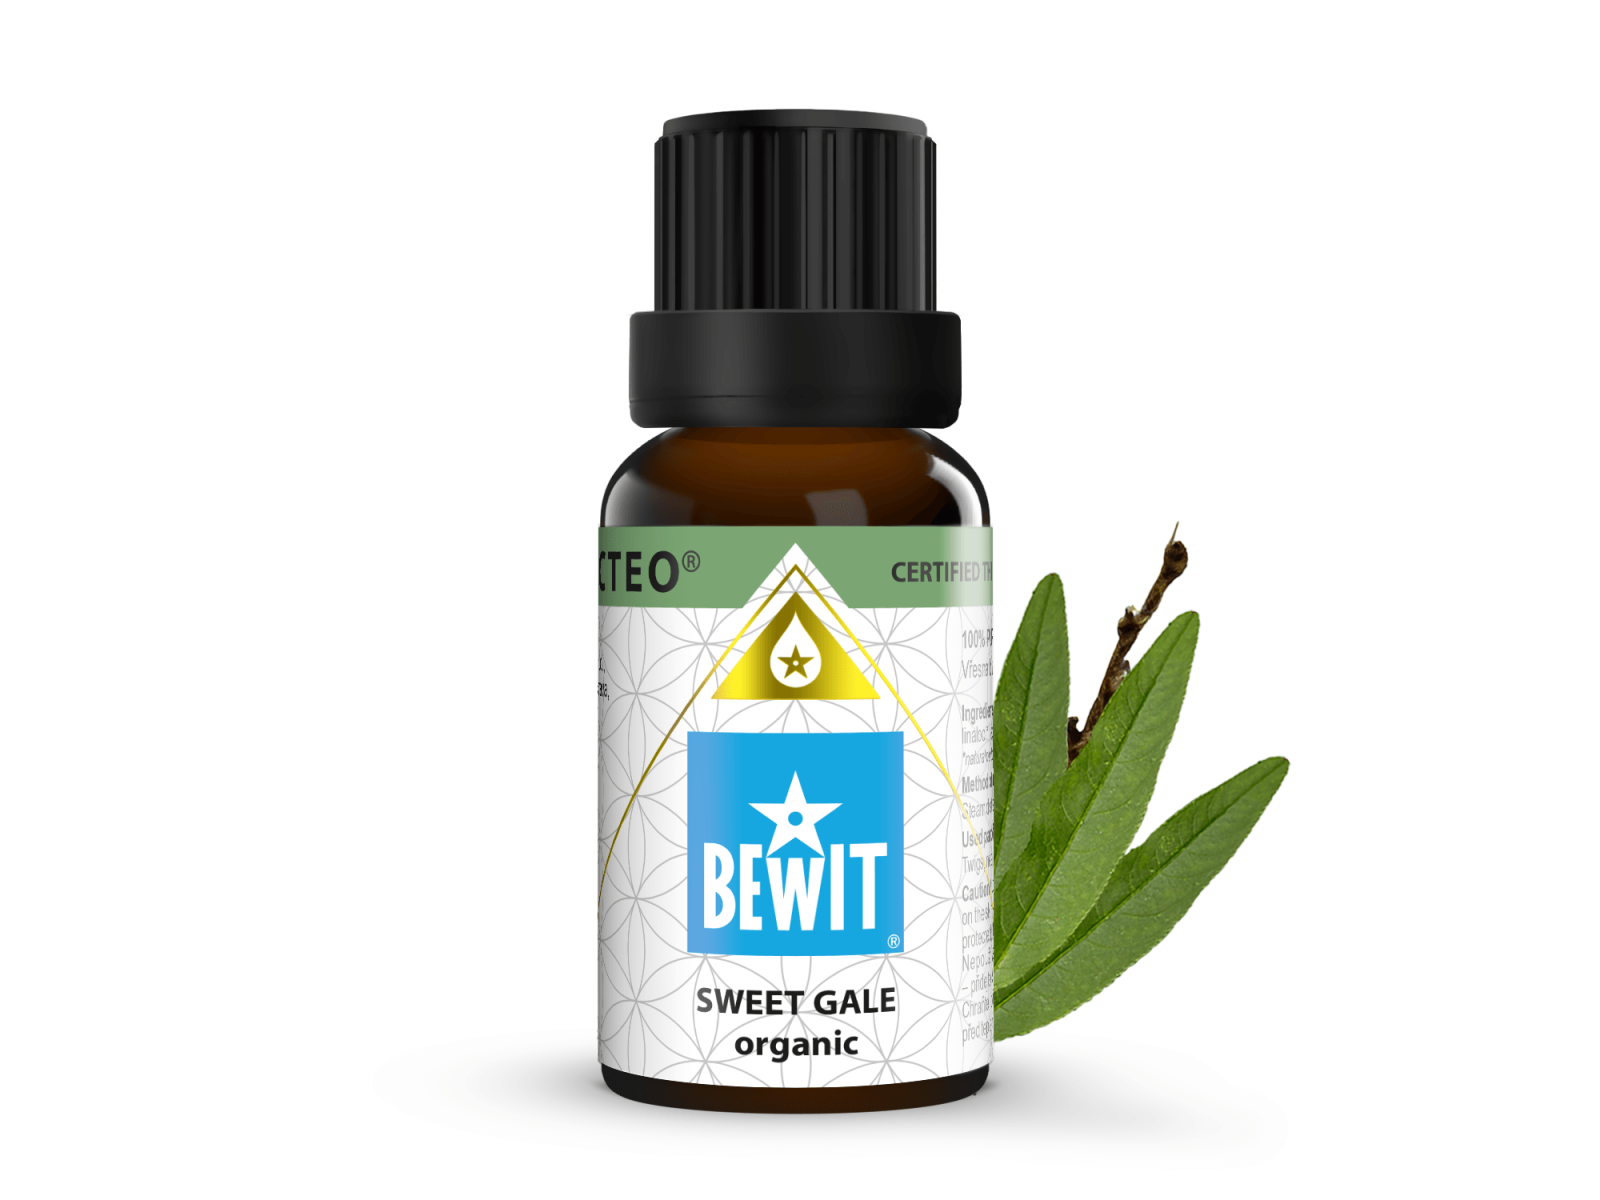 BEWIT Sweetgale organic - 100% pure and natural CTEO® essential oil